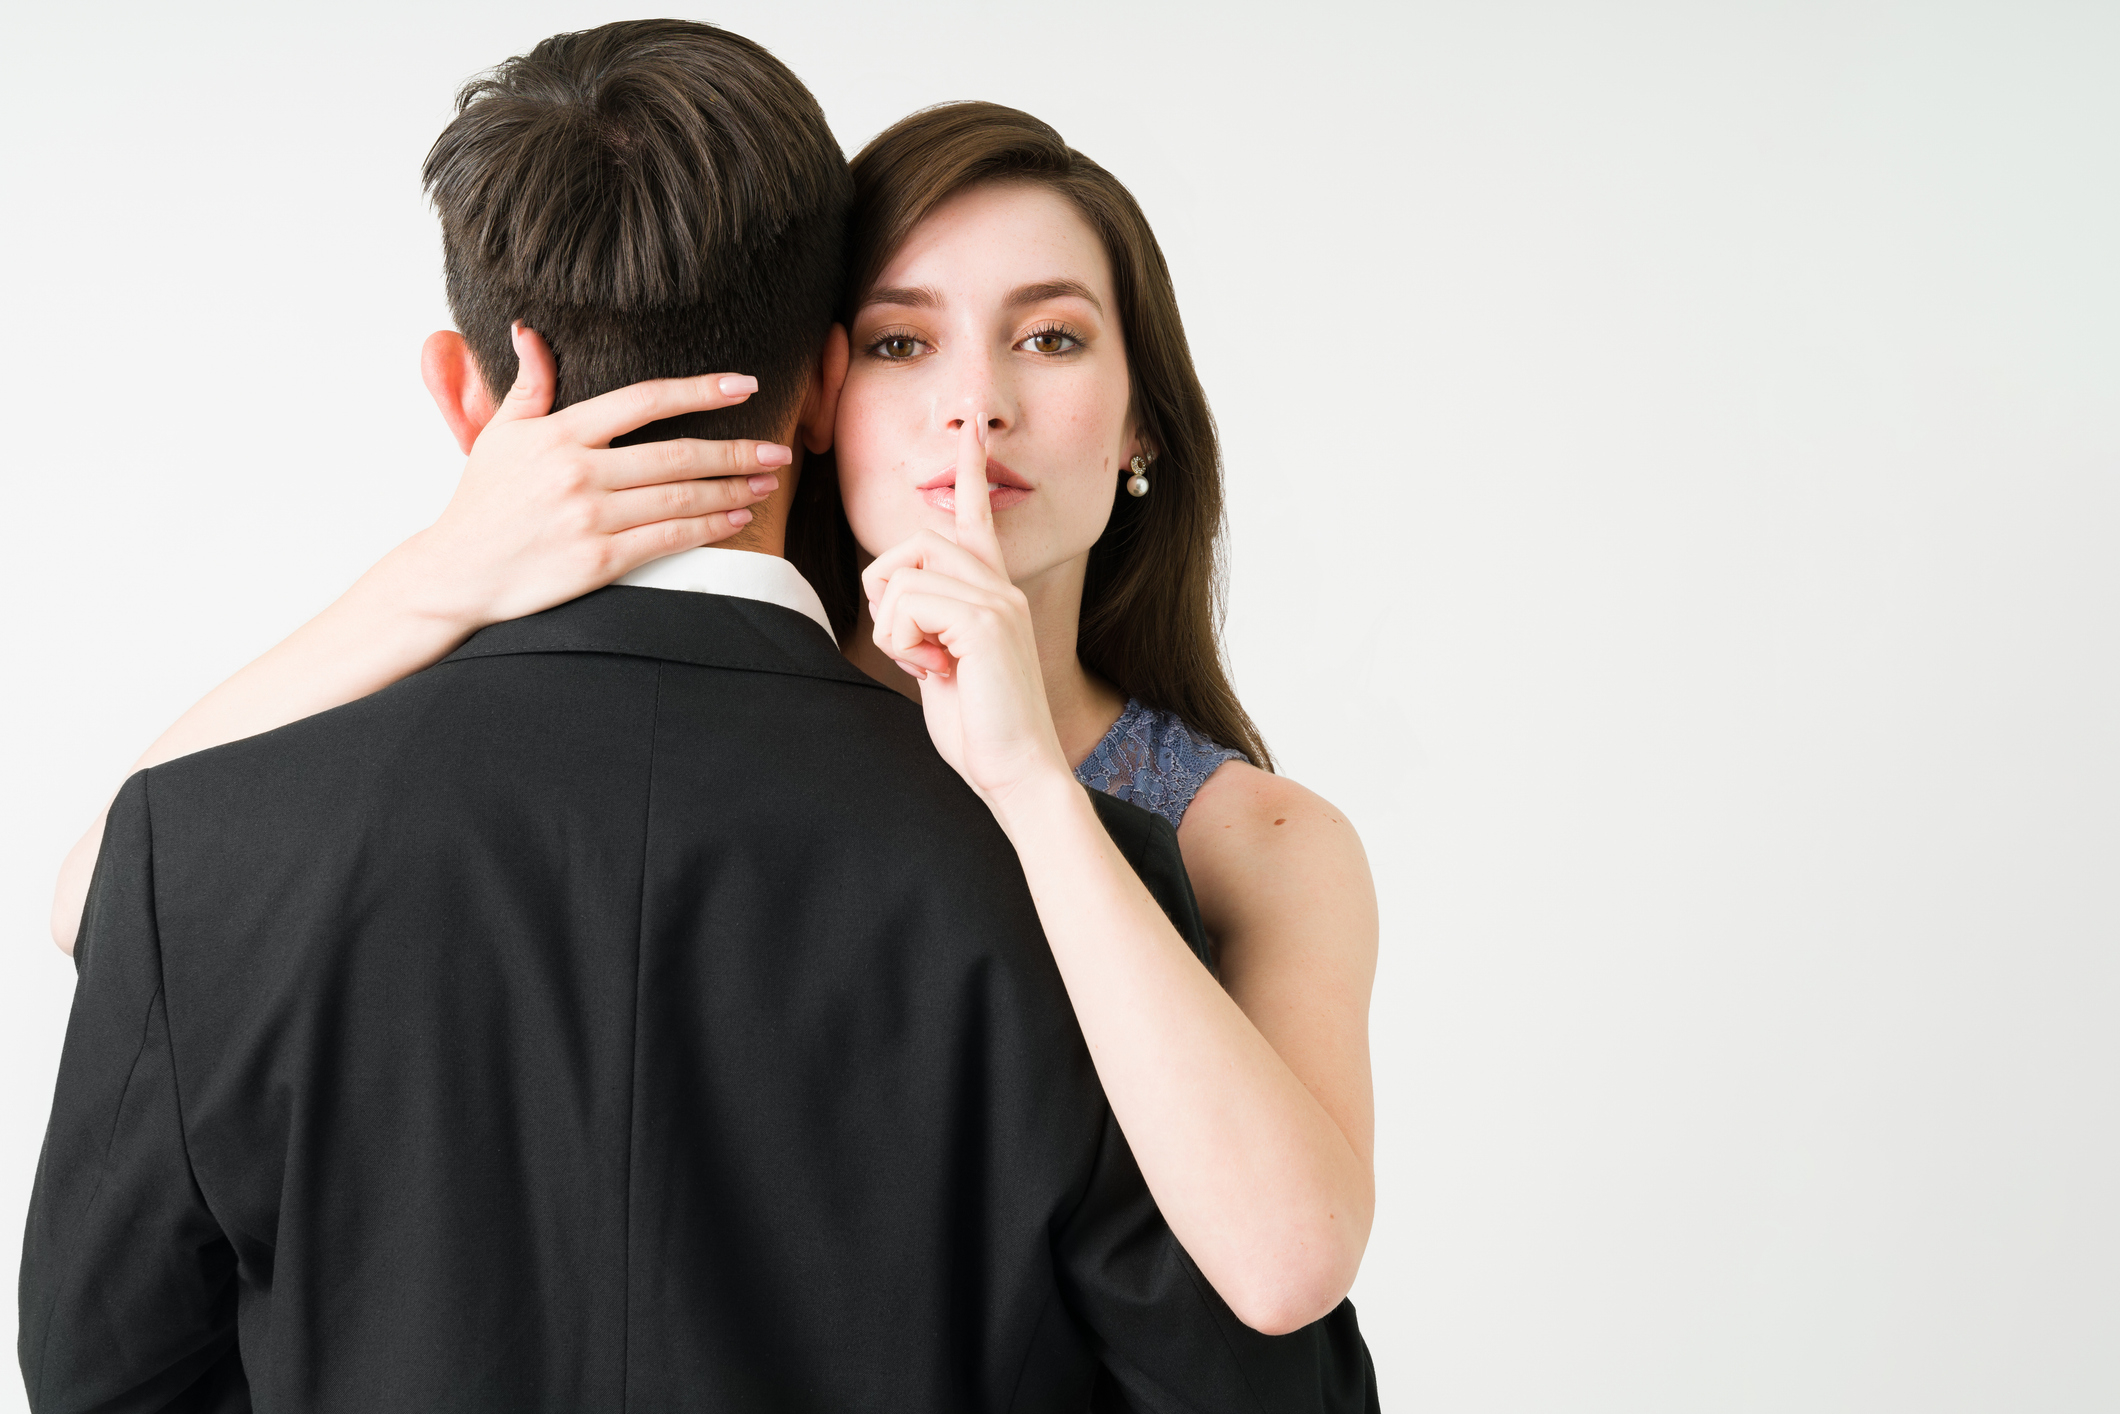 Woman with finger to lips making a silence gesture behind a man&#x27;s back, both dressed formally